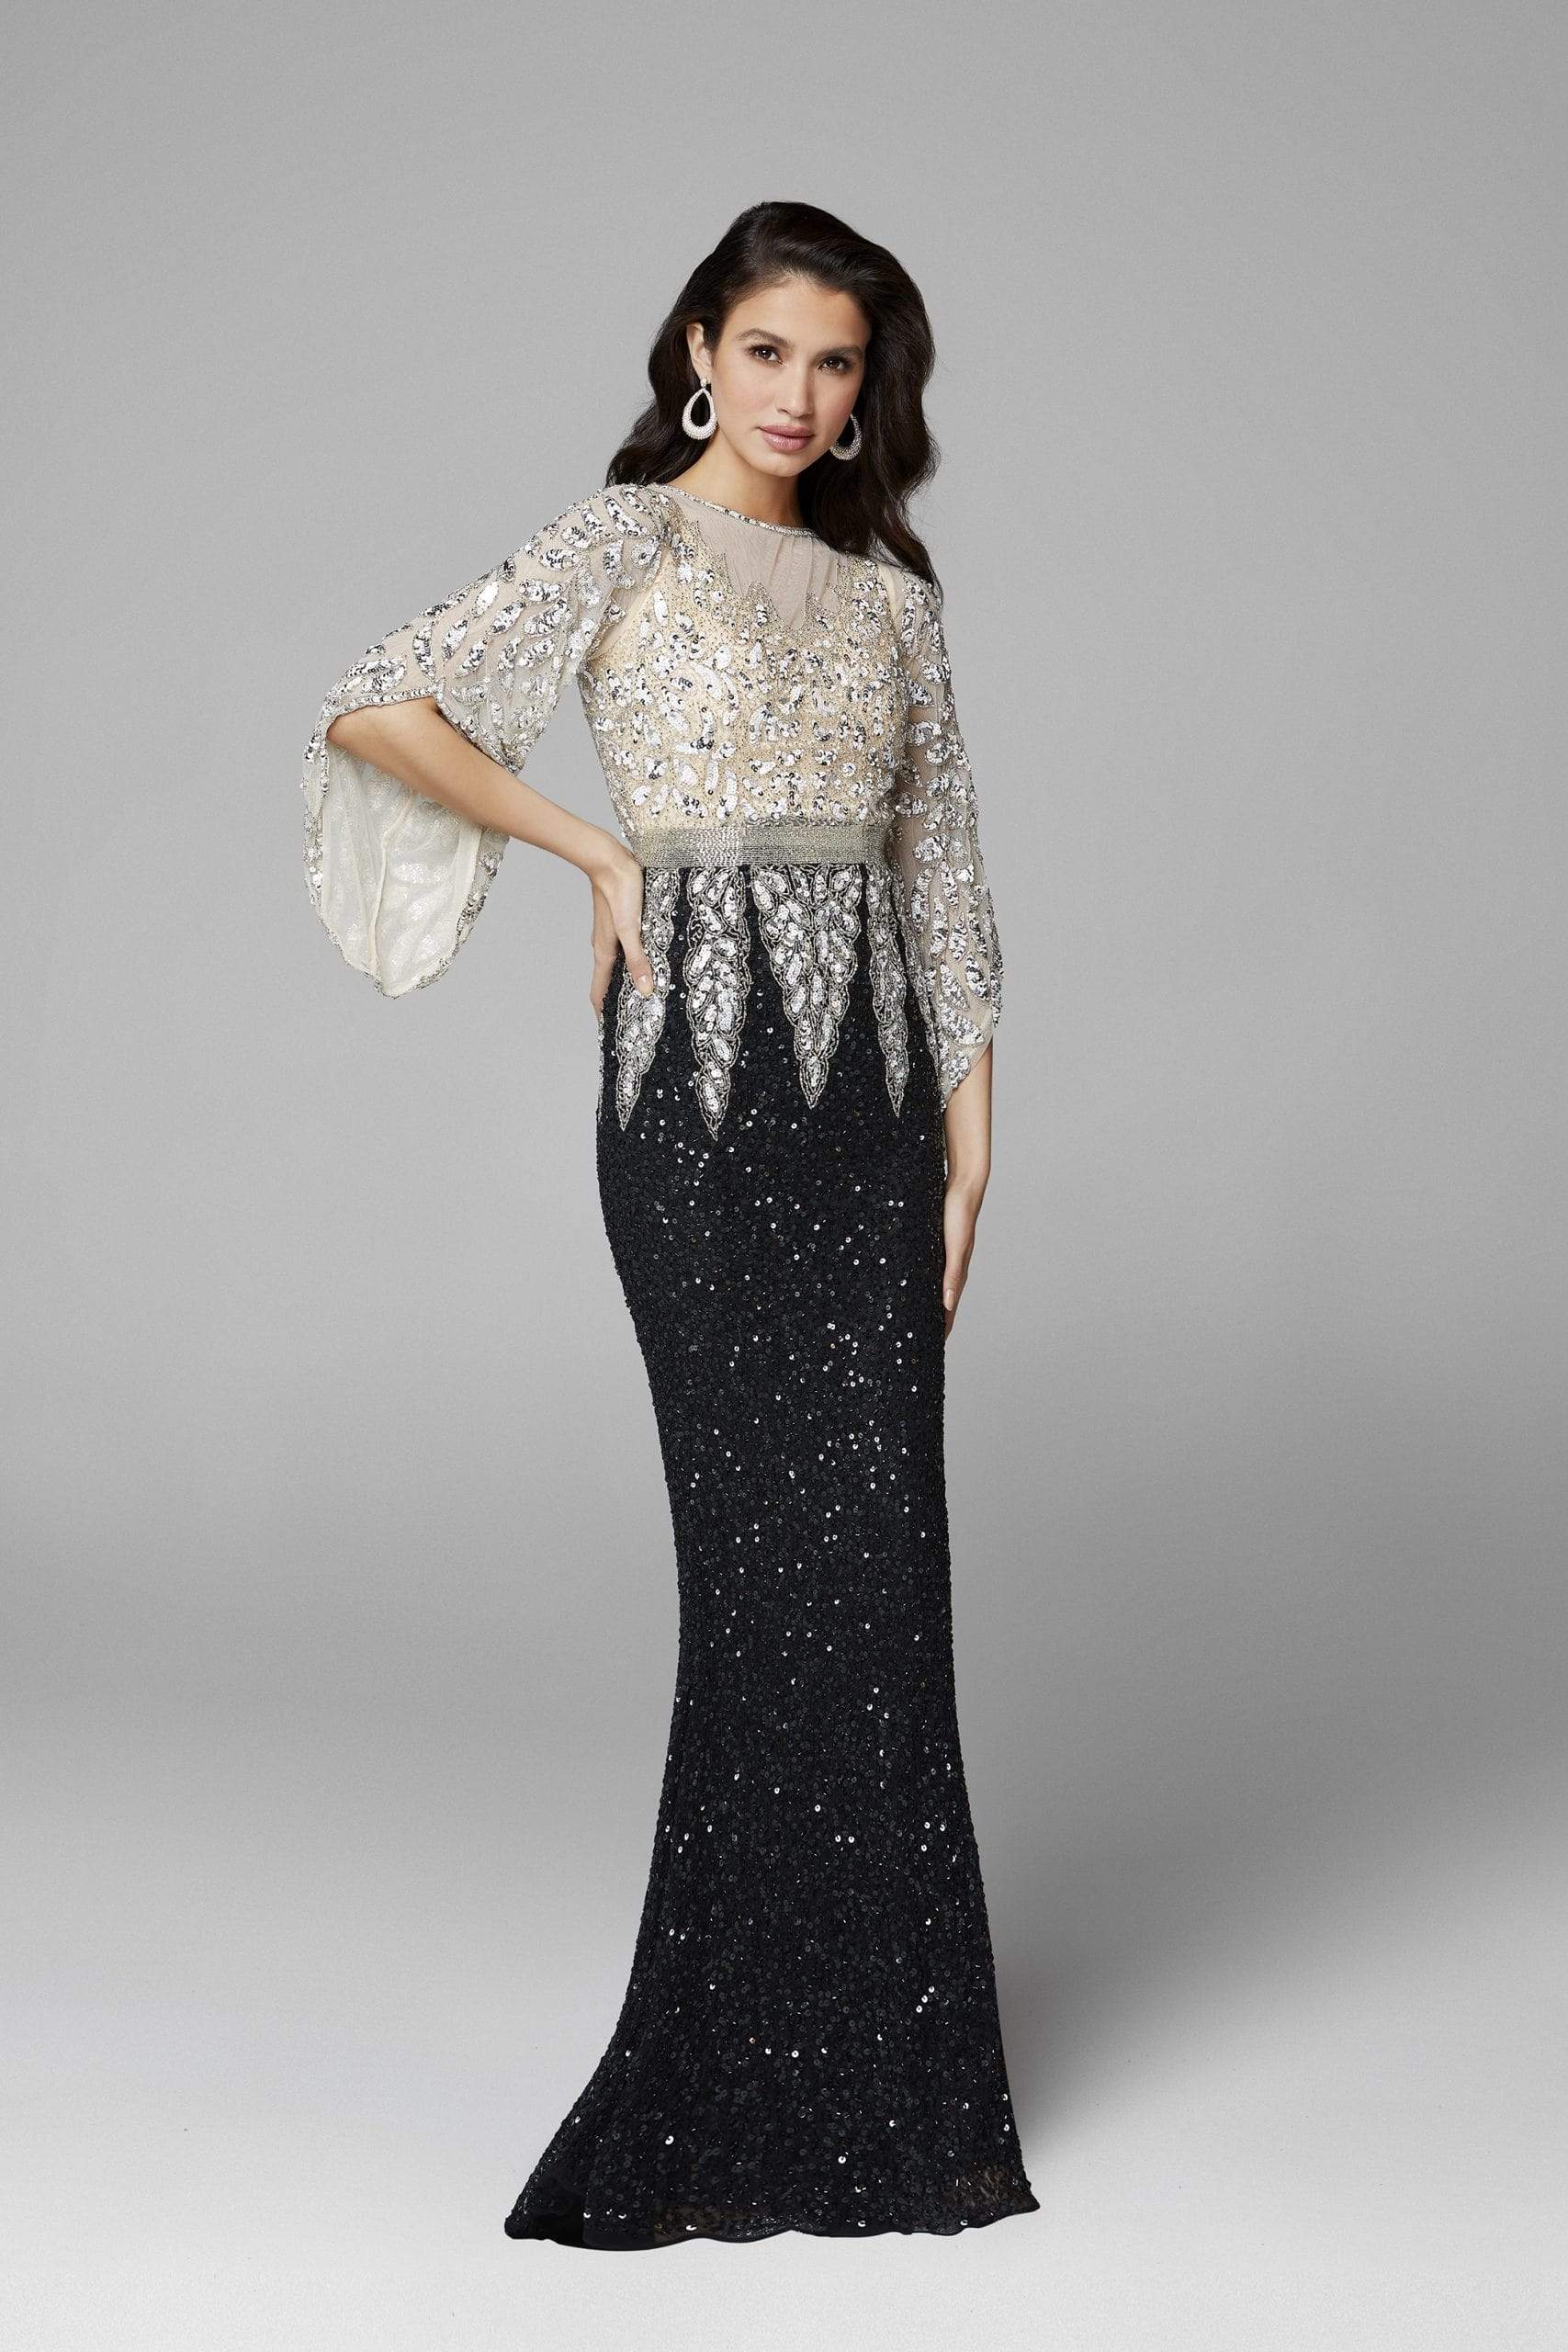 Image of Primavera Couture - Stunning Two-Tone Sequin Embellished Long Gown with Batwing Sleeves 1424